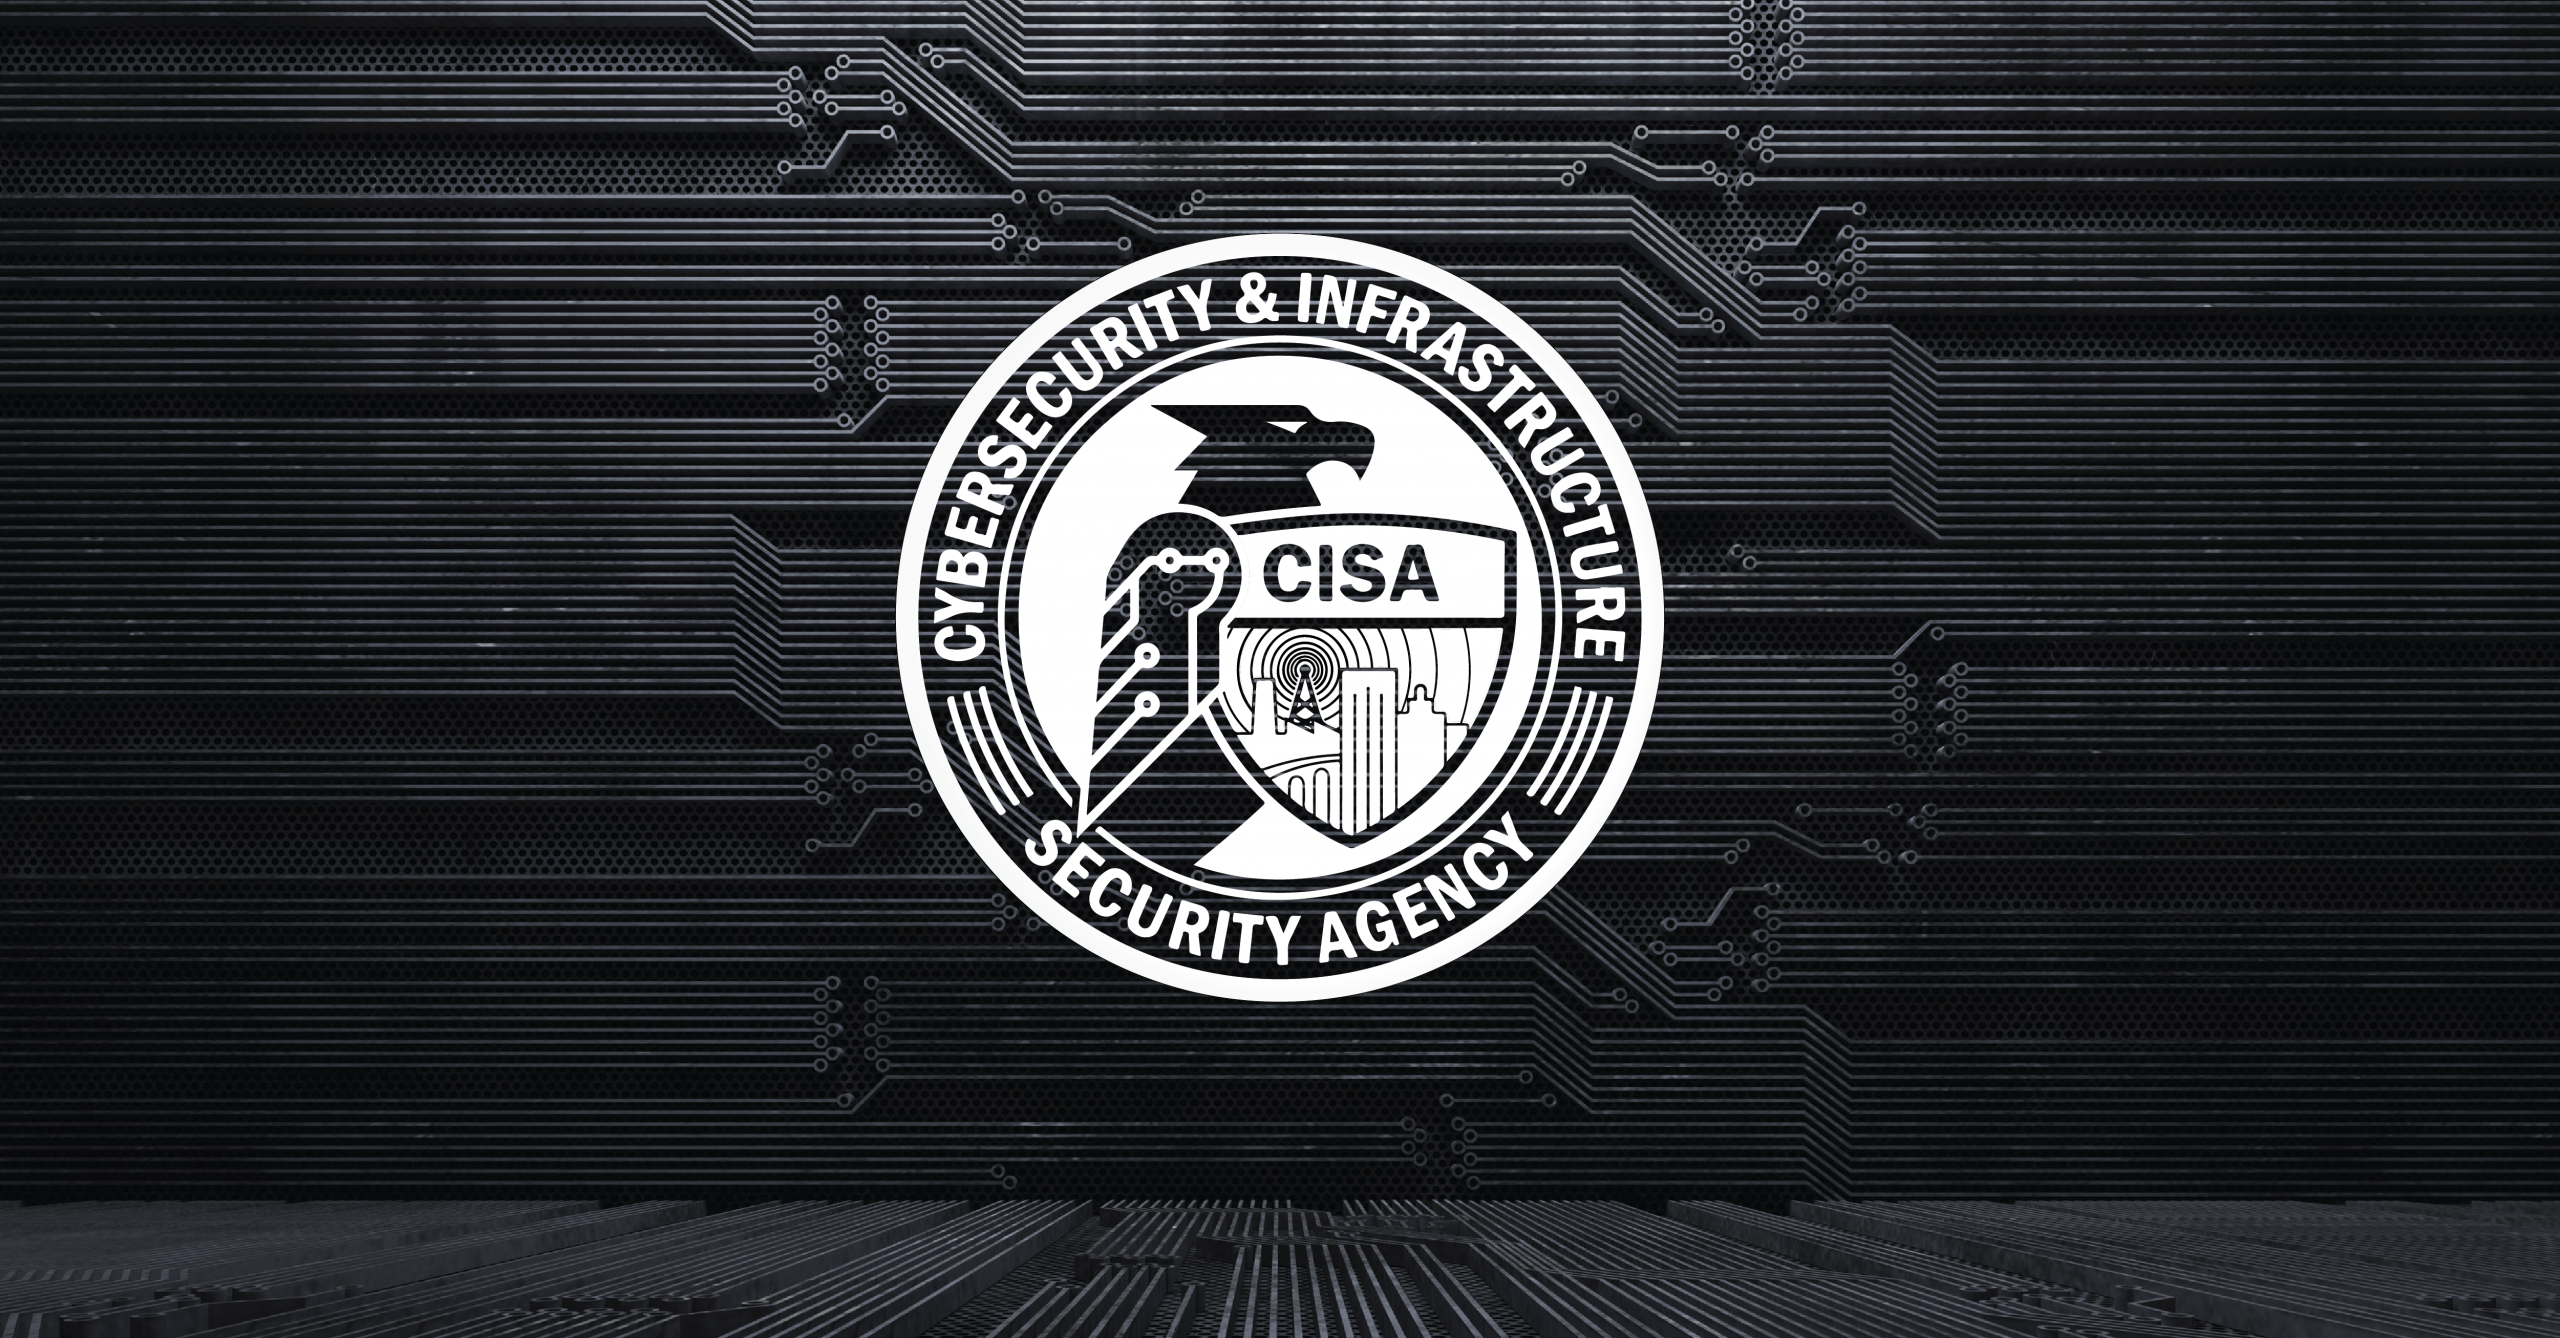 Read more about the article Shields Up! CISA’s Cybersecurity Strengthening Campaign.